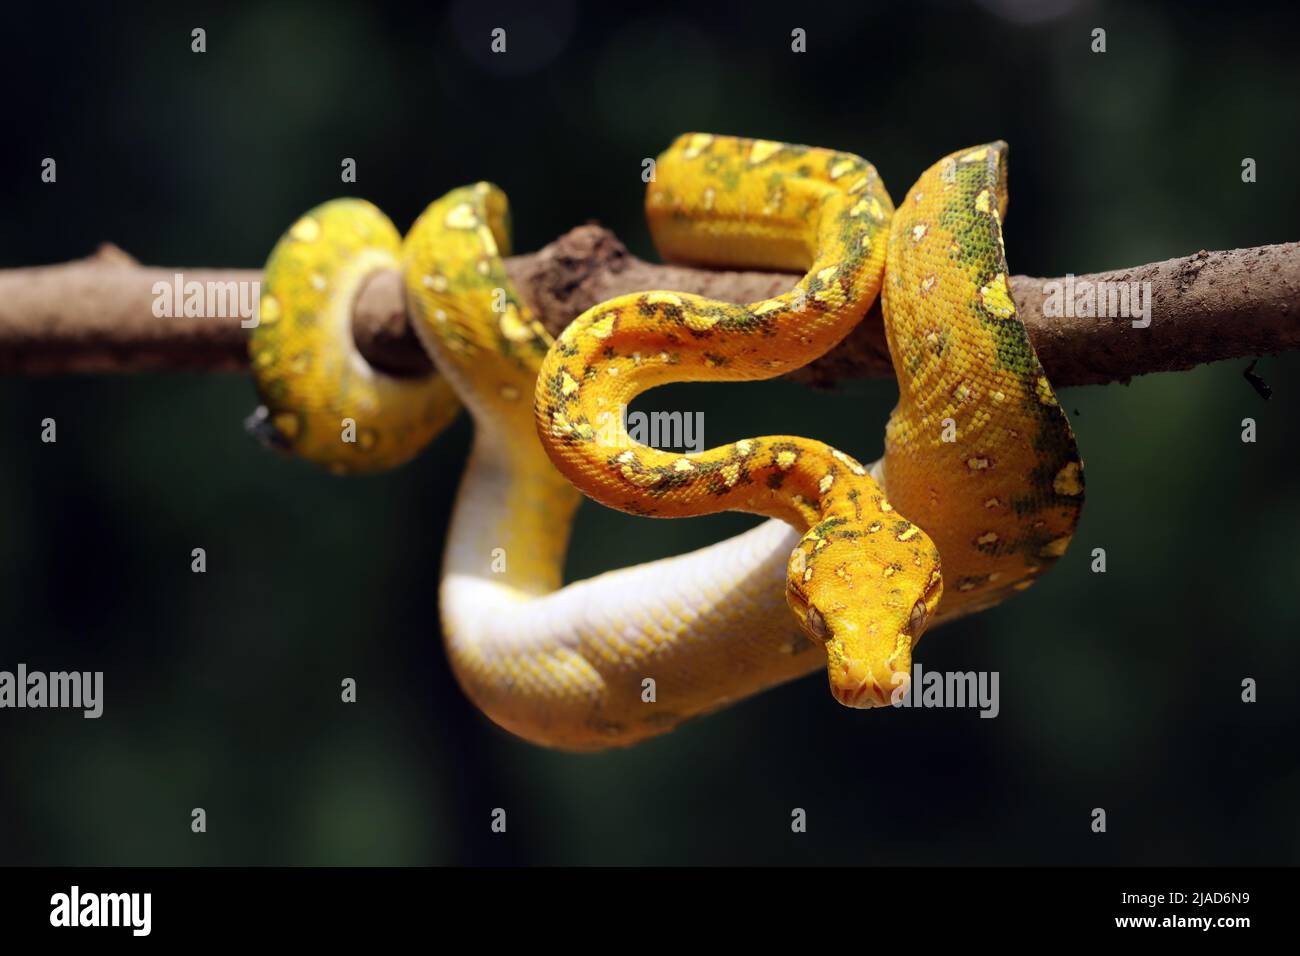 Juvenile Green tree python on a branch, Indonesia Stock Photo